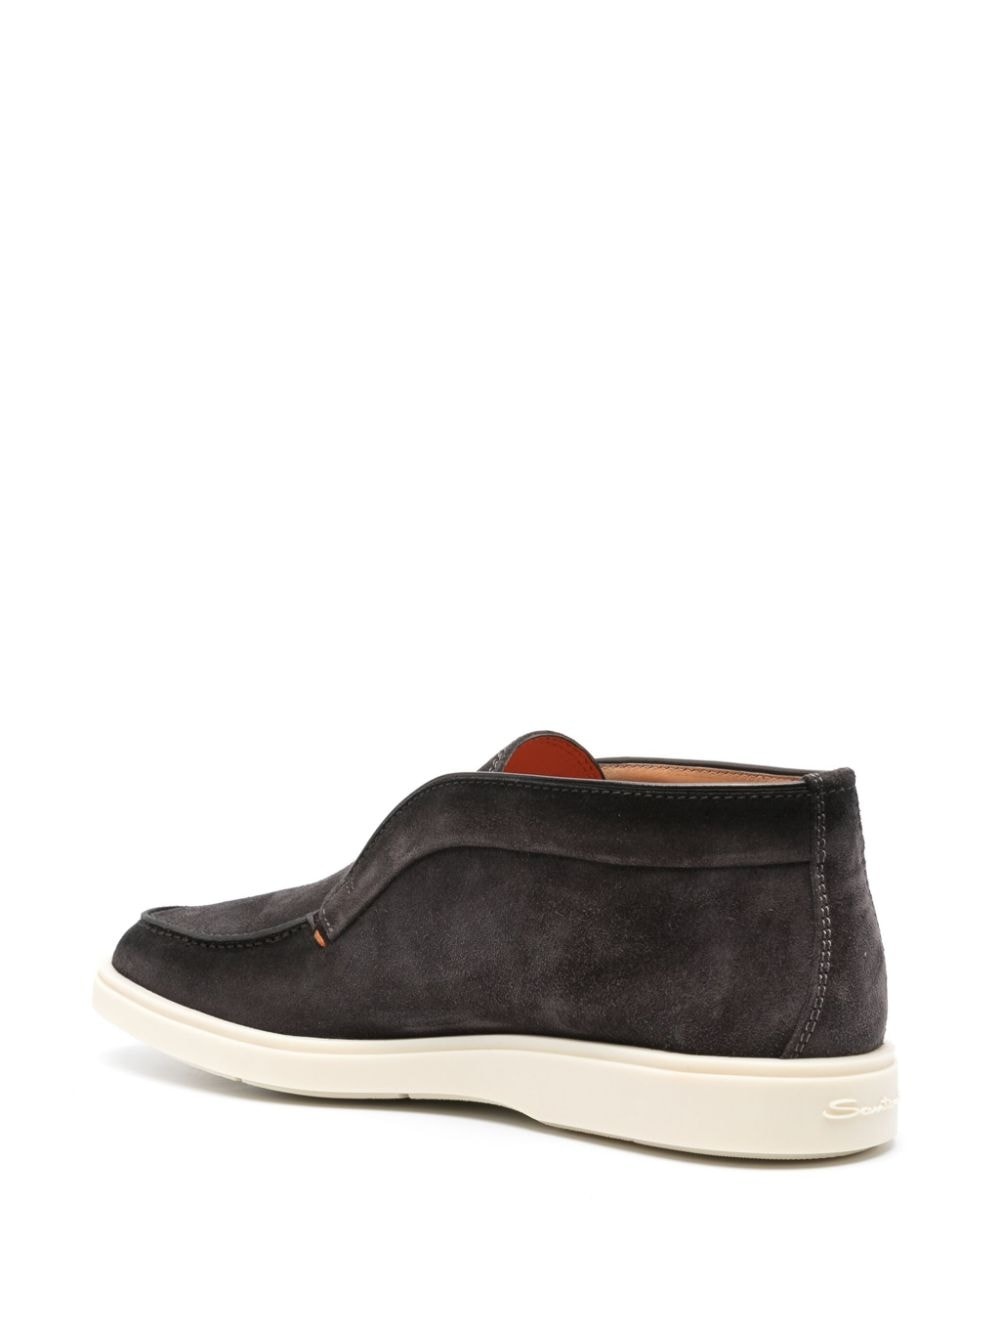 slip-on suede boots - 3